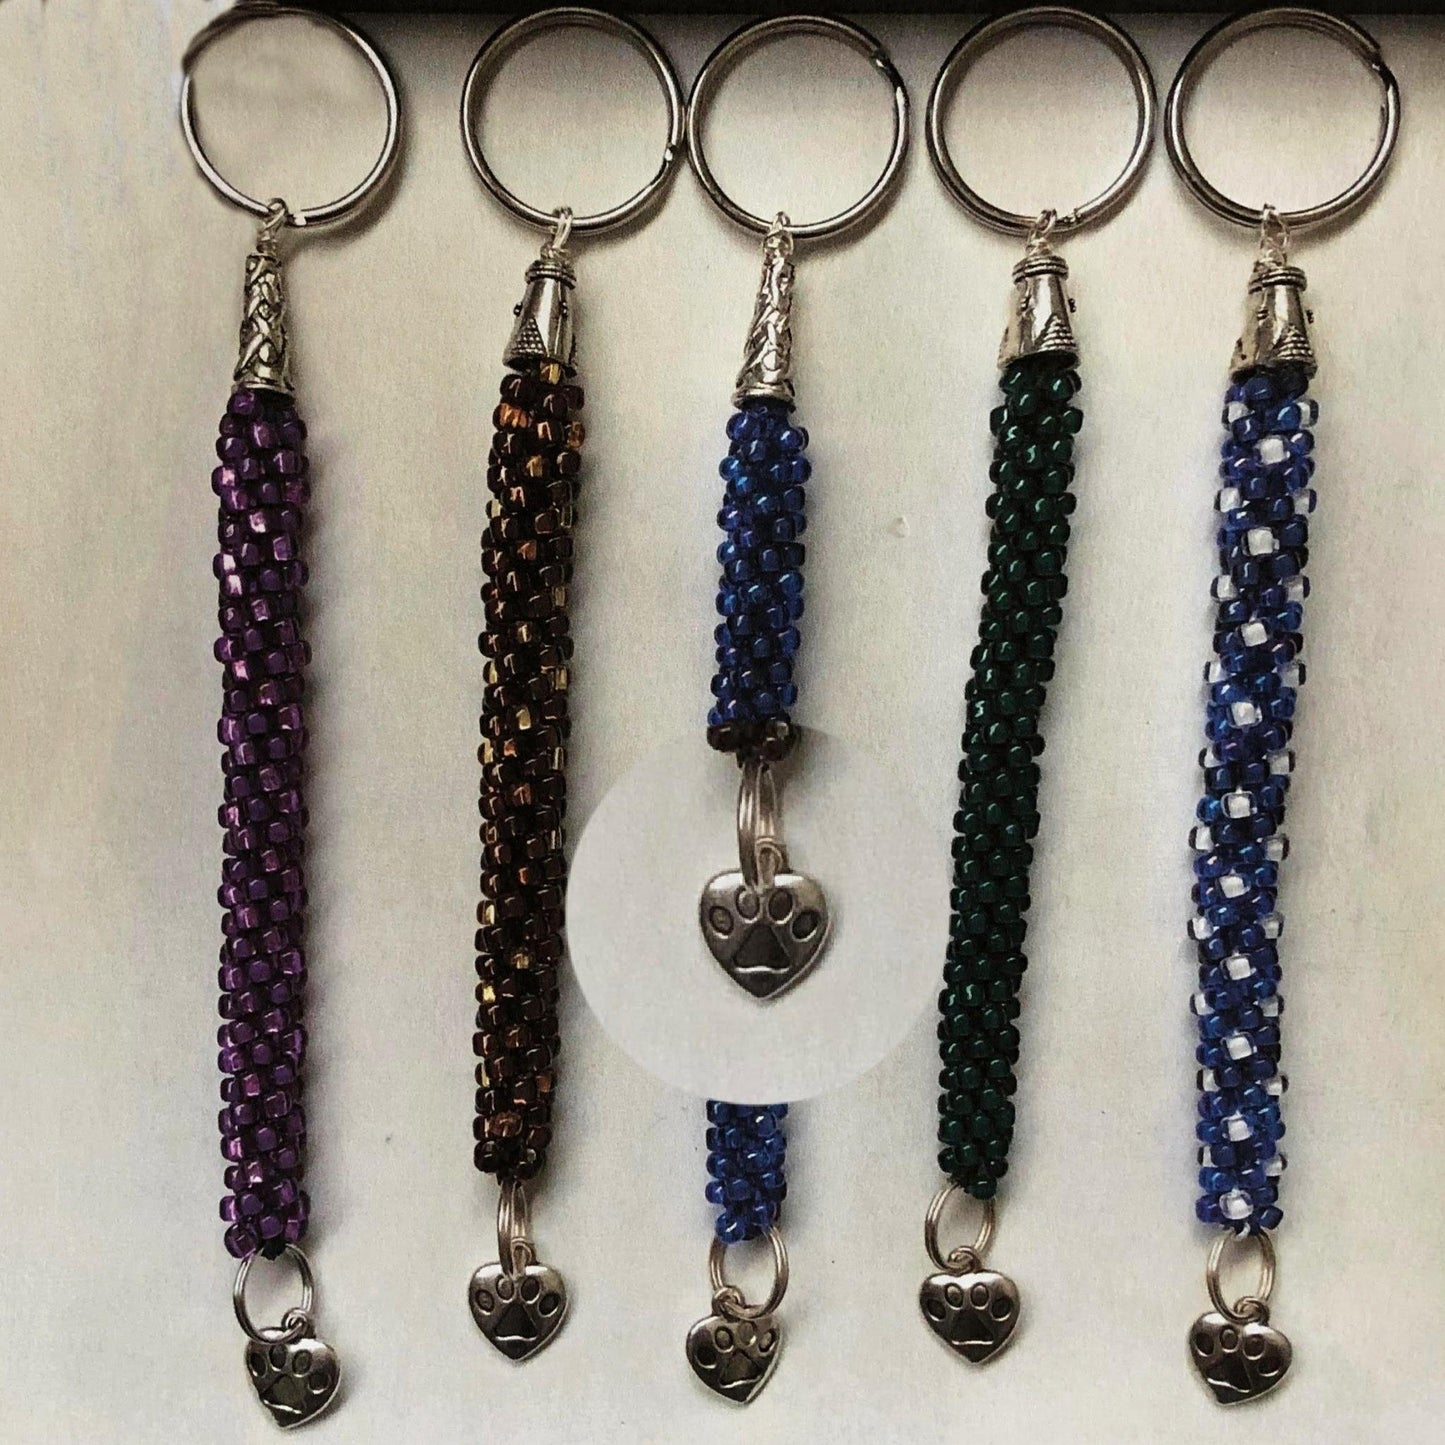 The assortment of our Animal-Lover Keychains